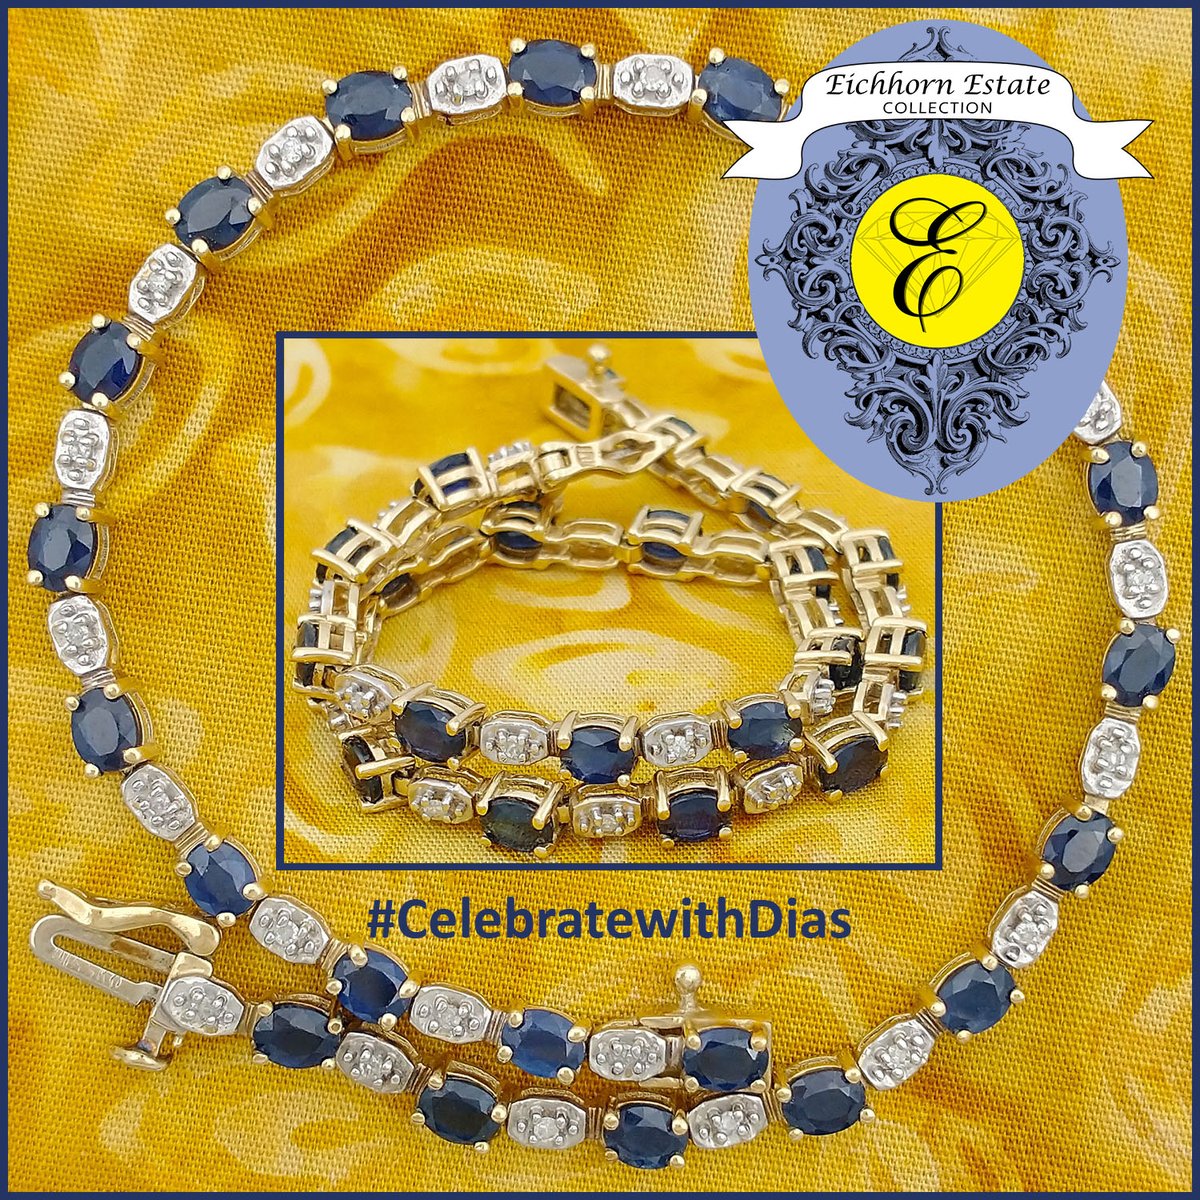 10K yellow gold 7.25' Bracelet with 21 oval faceted Blue Sapphires and 21 single-cut Diamonds. From Our Estate Collection $800. eichhornjewelry.com/estate-collect… #start2sparkle #alwaysthinkDIAMONDS #eichhornglow #1diamondatatime #CelebratewithDias #ColorWithYourDias #estatejewelry